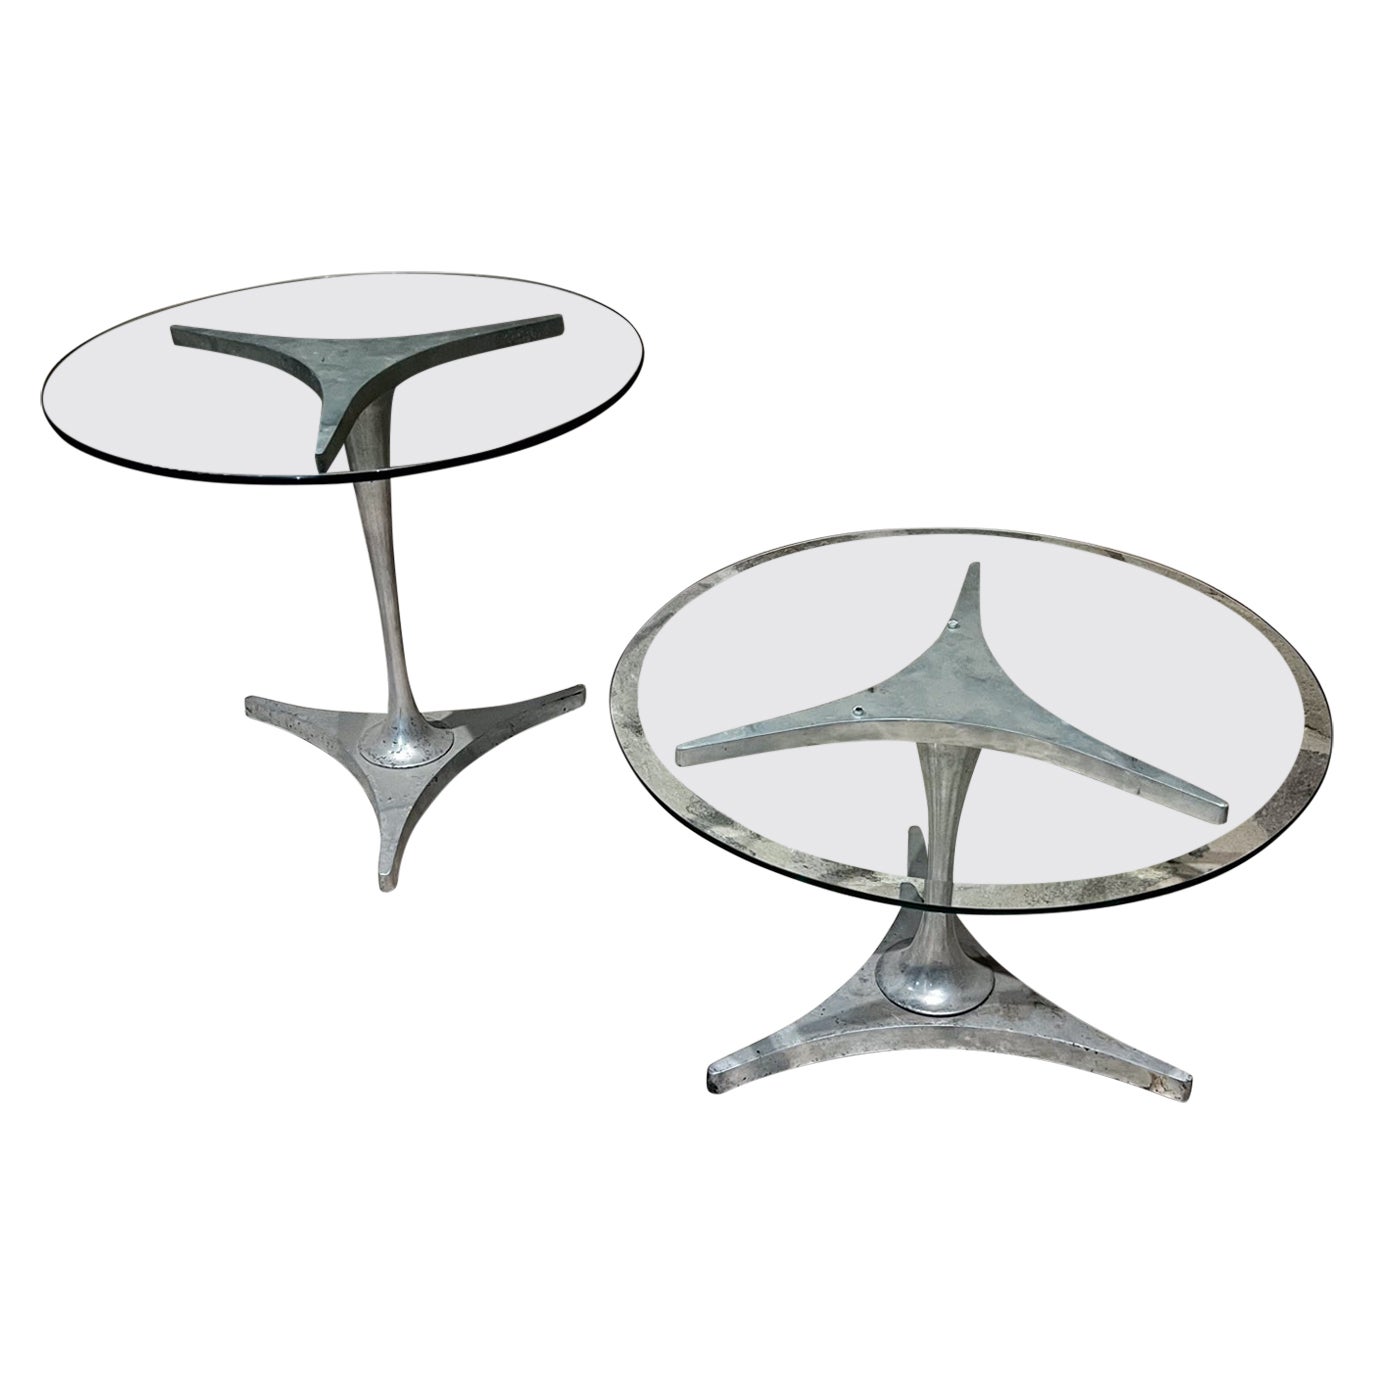 1960s Two Nesting Side Tables Aluminum Tripod Base For Sale